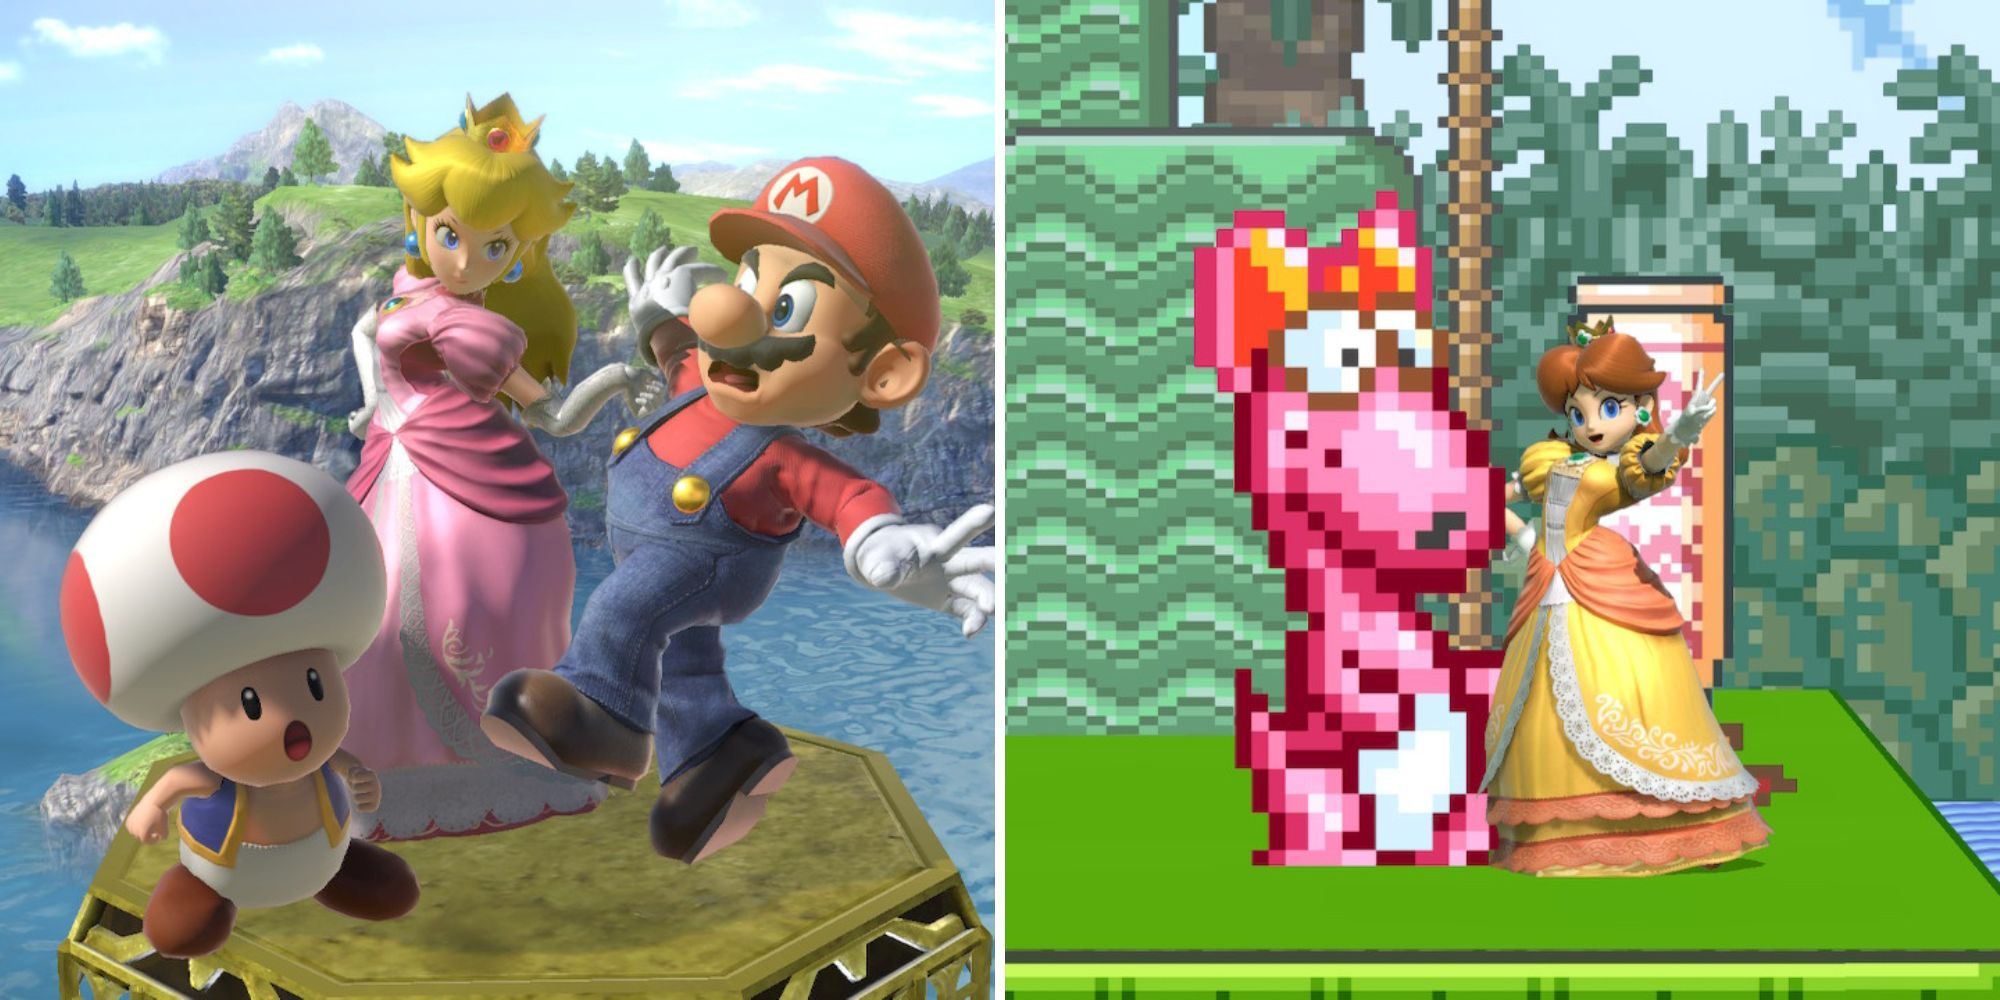 Peach and Toad confront Mario and Daisy poses with Birdo